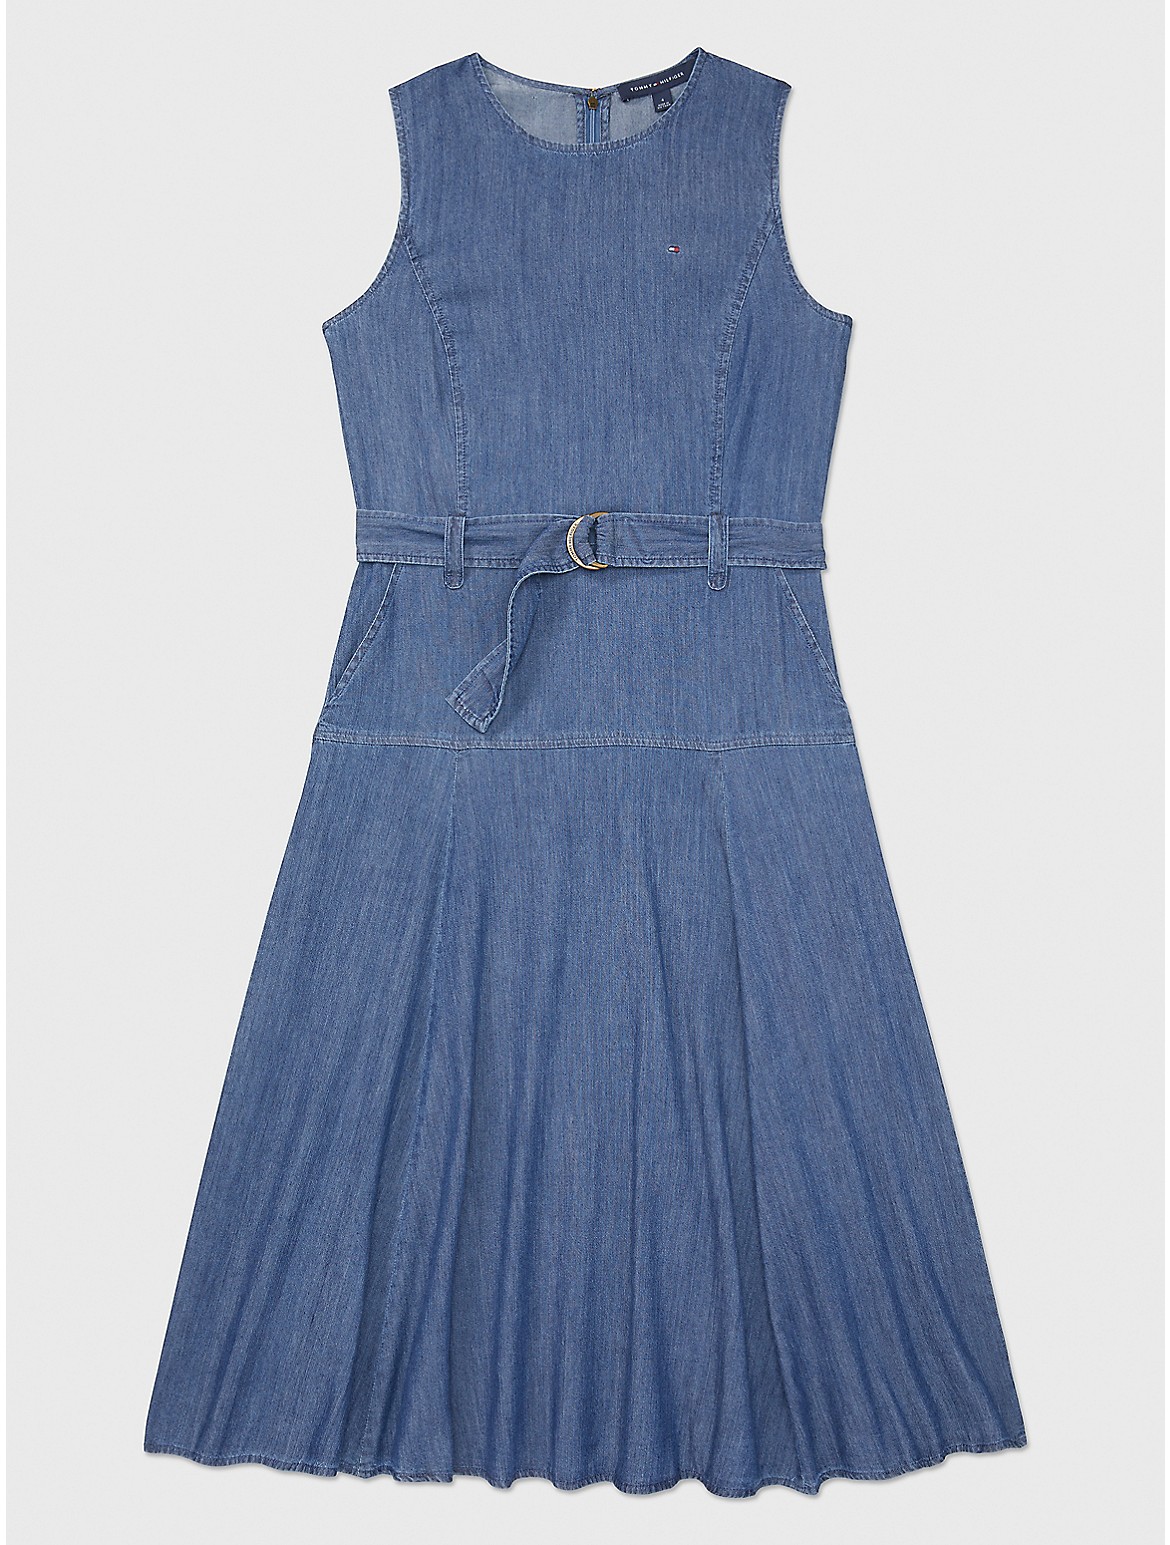 Tommy Hilfiger Women's Belted Chambray Dress - Blue - 2